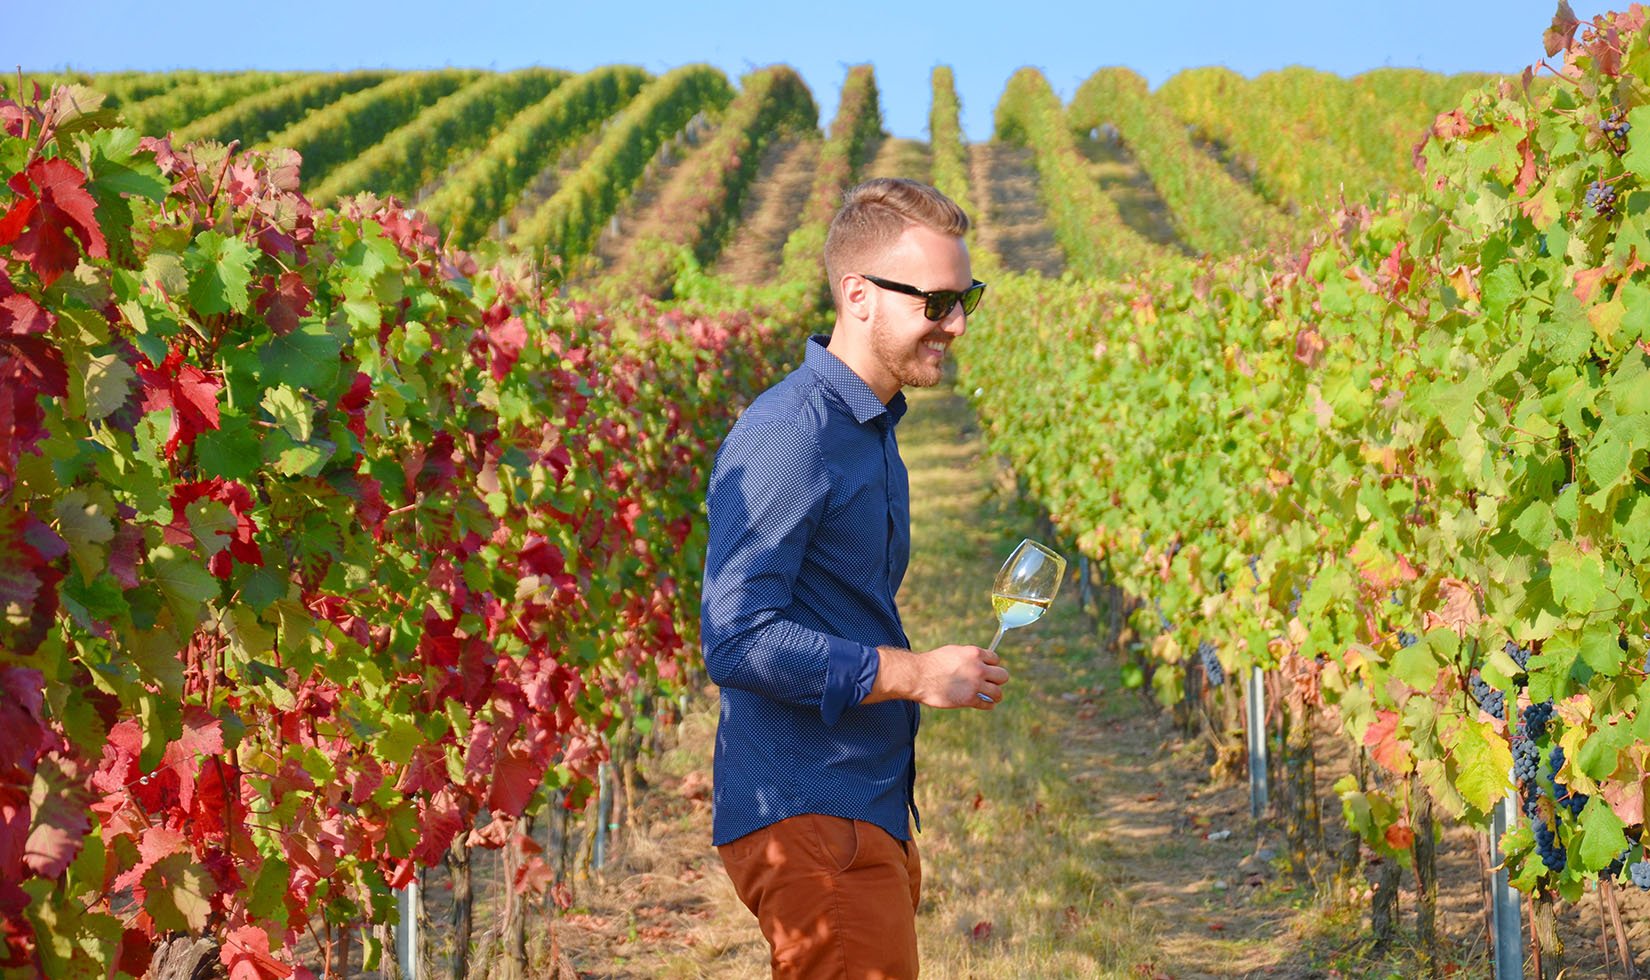 A man with sunglasses, a navy blue button down, and burnt orange pants smiles and holds a glass of white wine in a vineyard row. The leaves are changing from vibrant green to red.